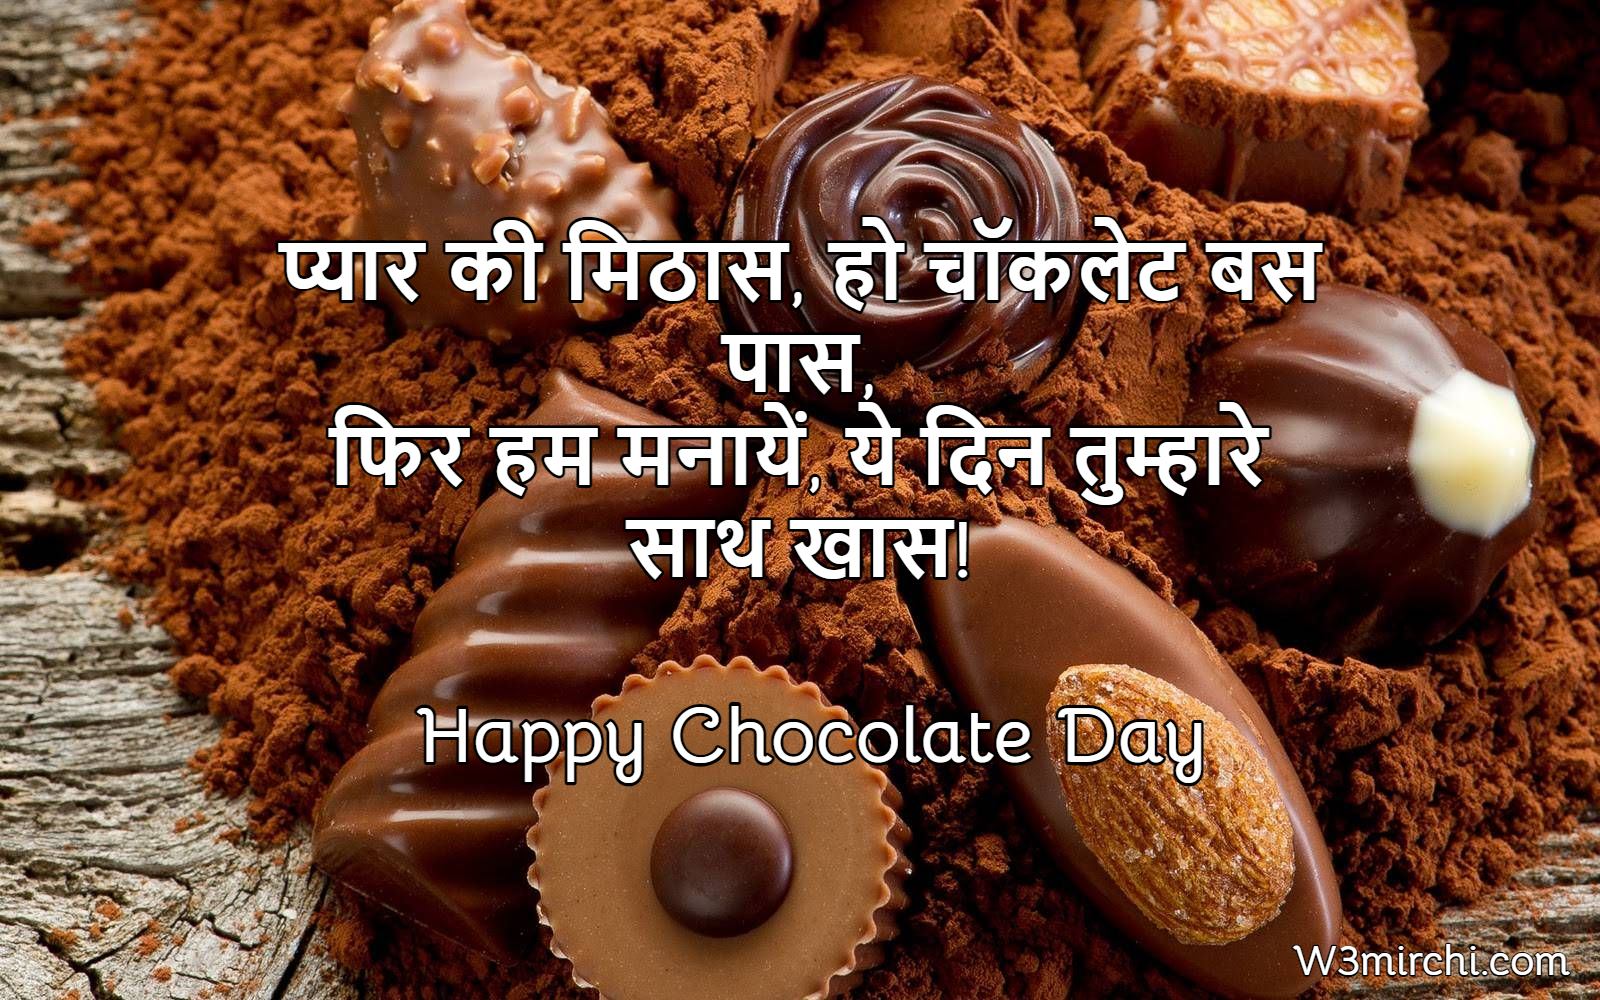 Chocolate Day Wishes & Quotes